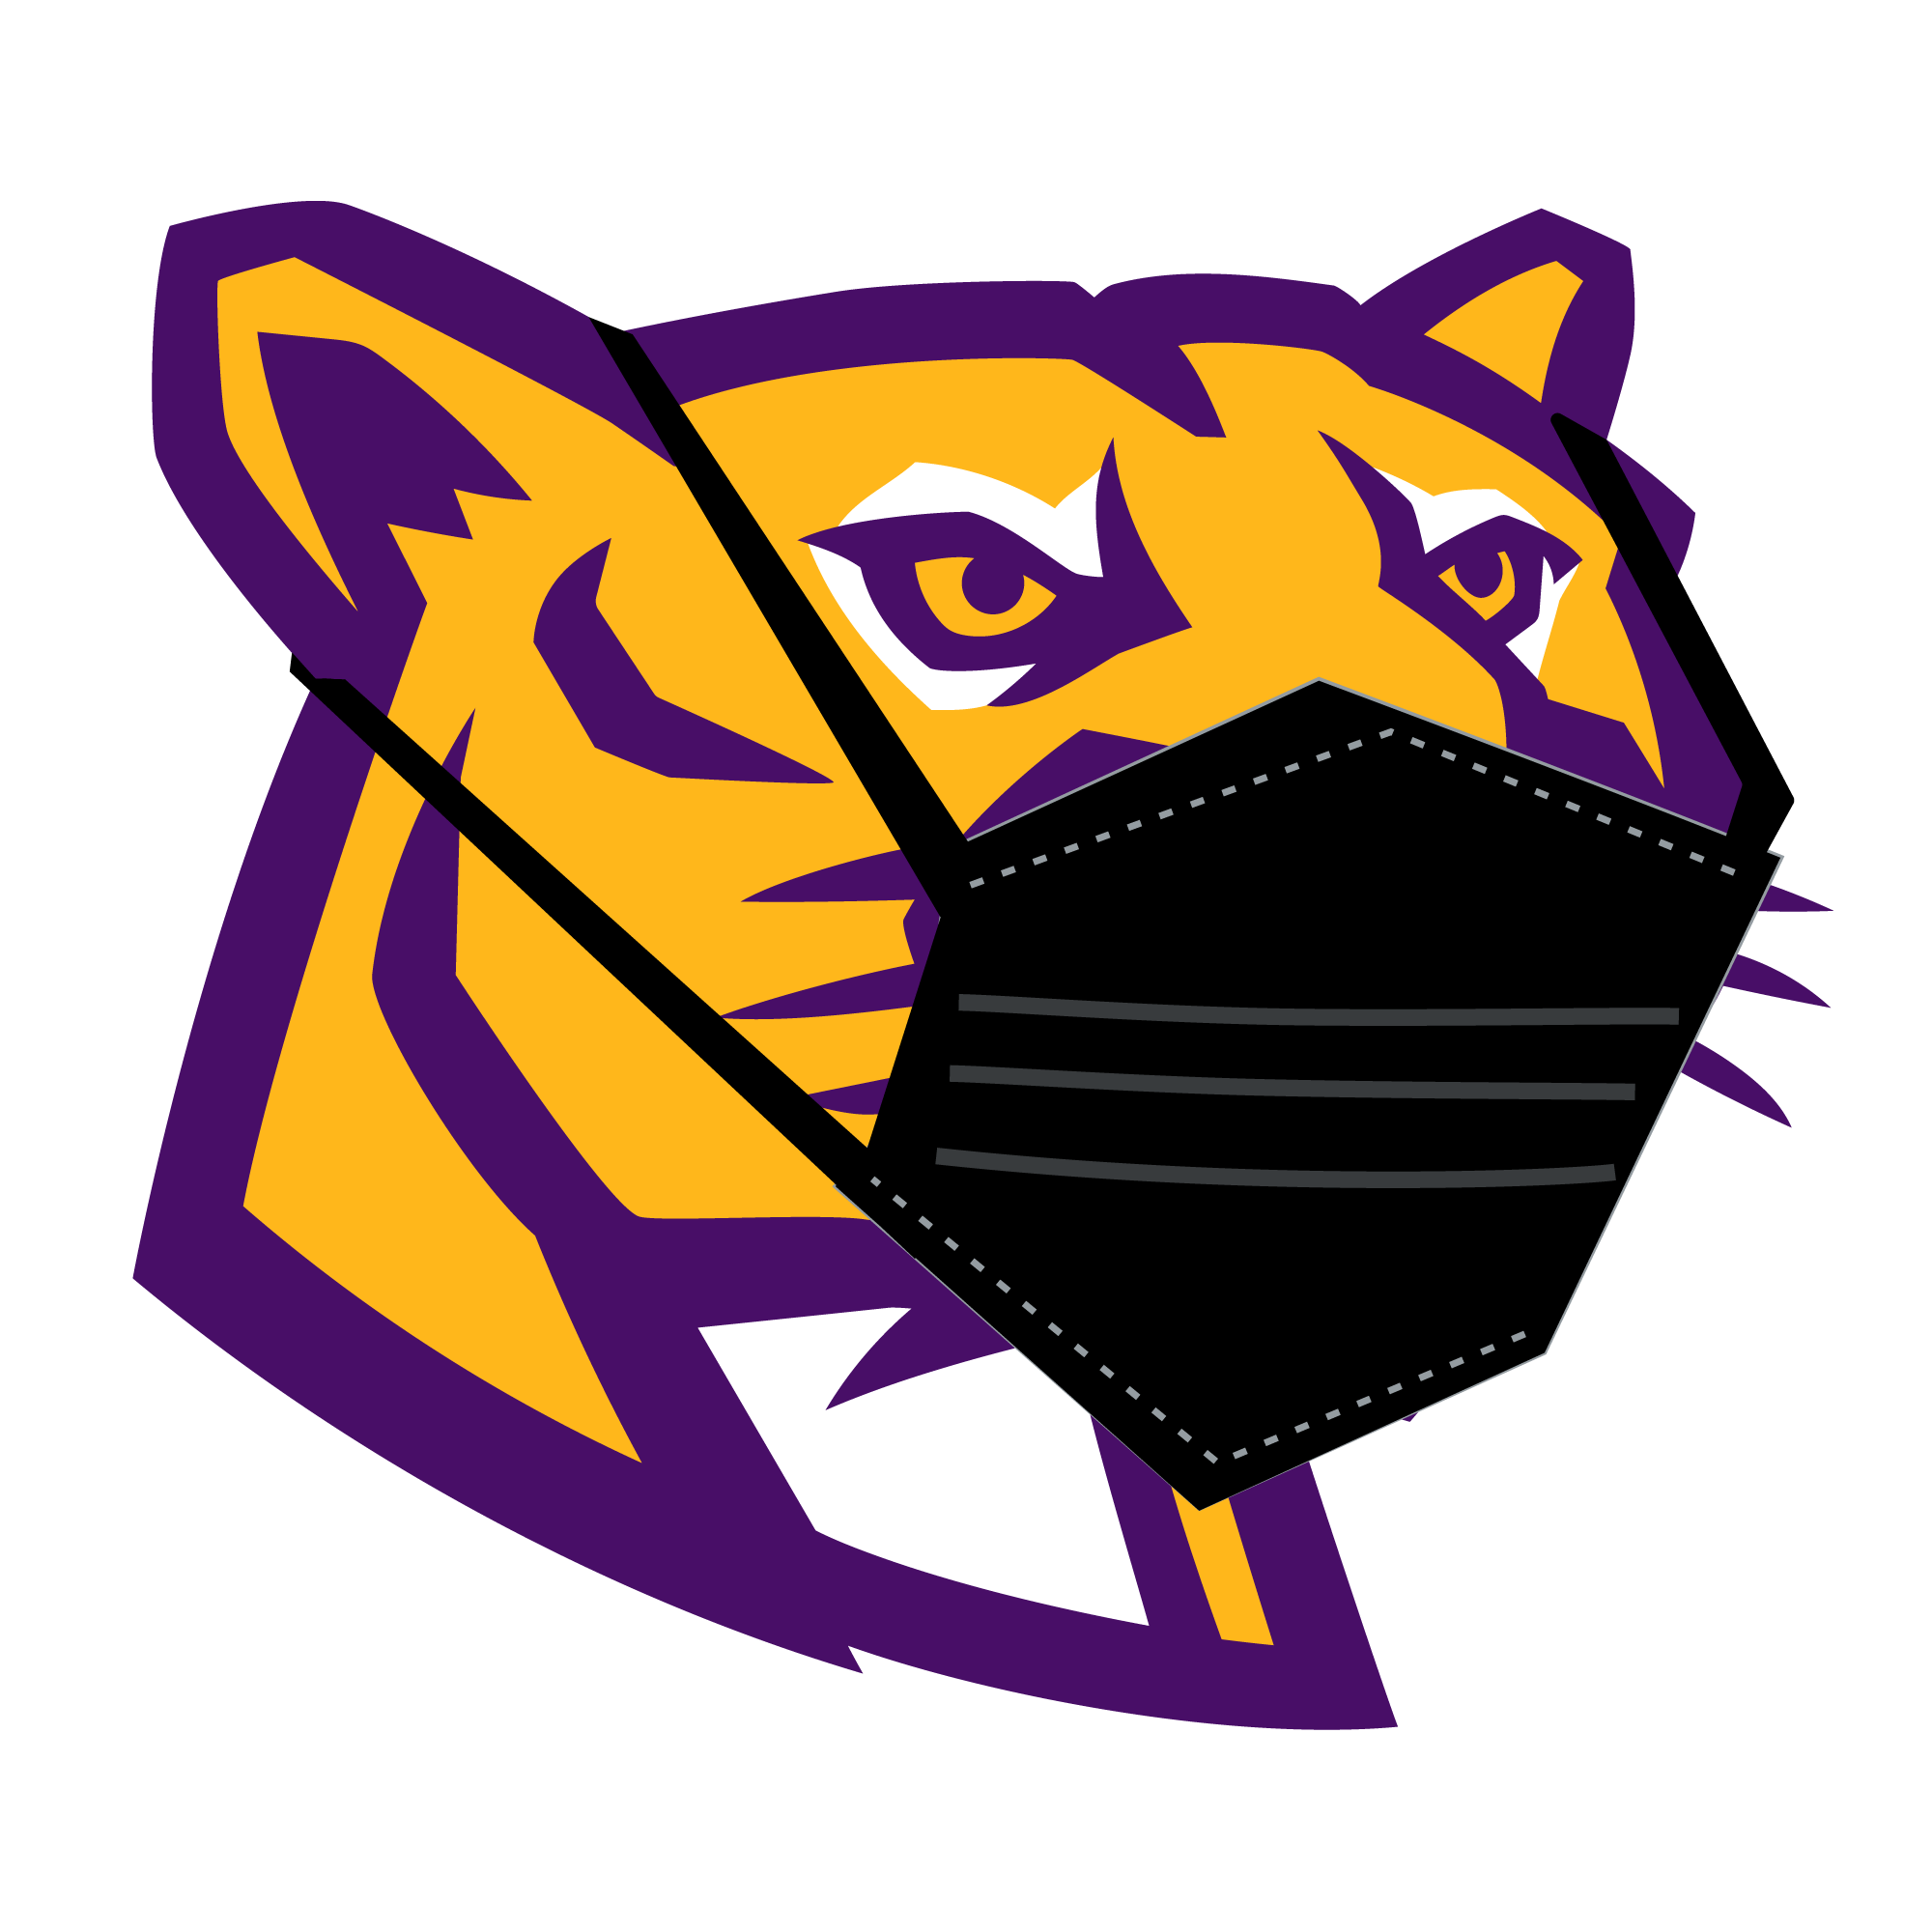 Affton Cougar with a face mask